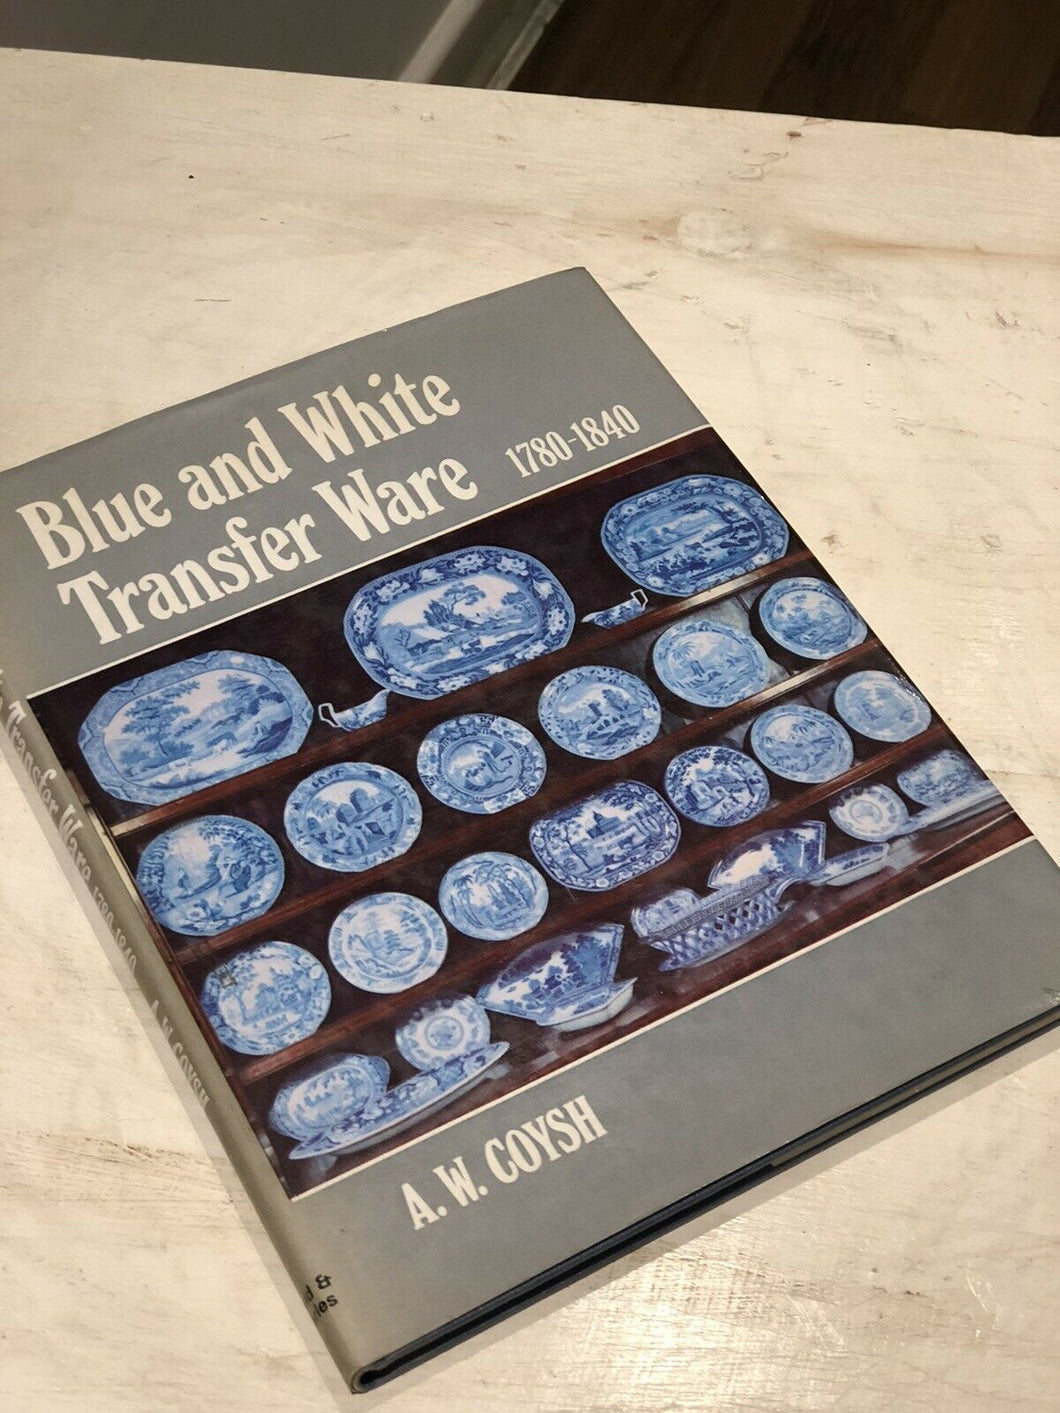 Blue And White Transfer Ware 1780-1840